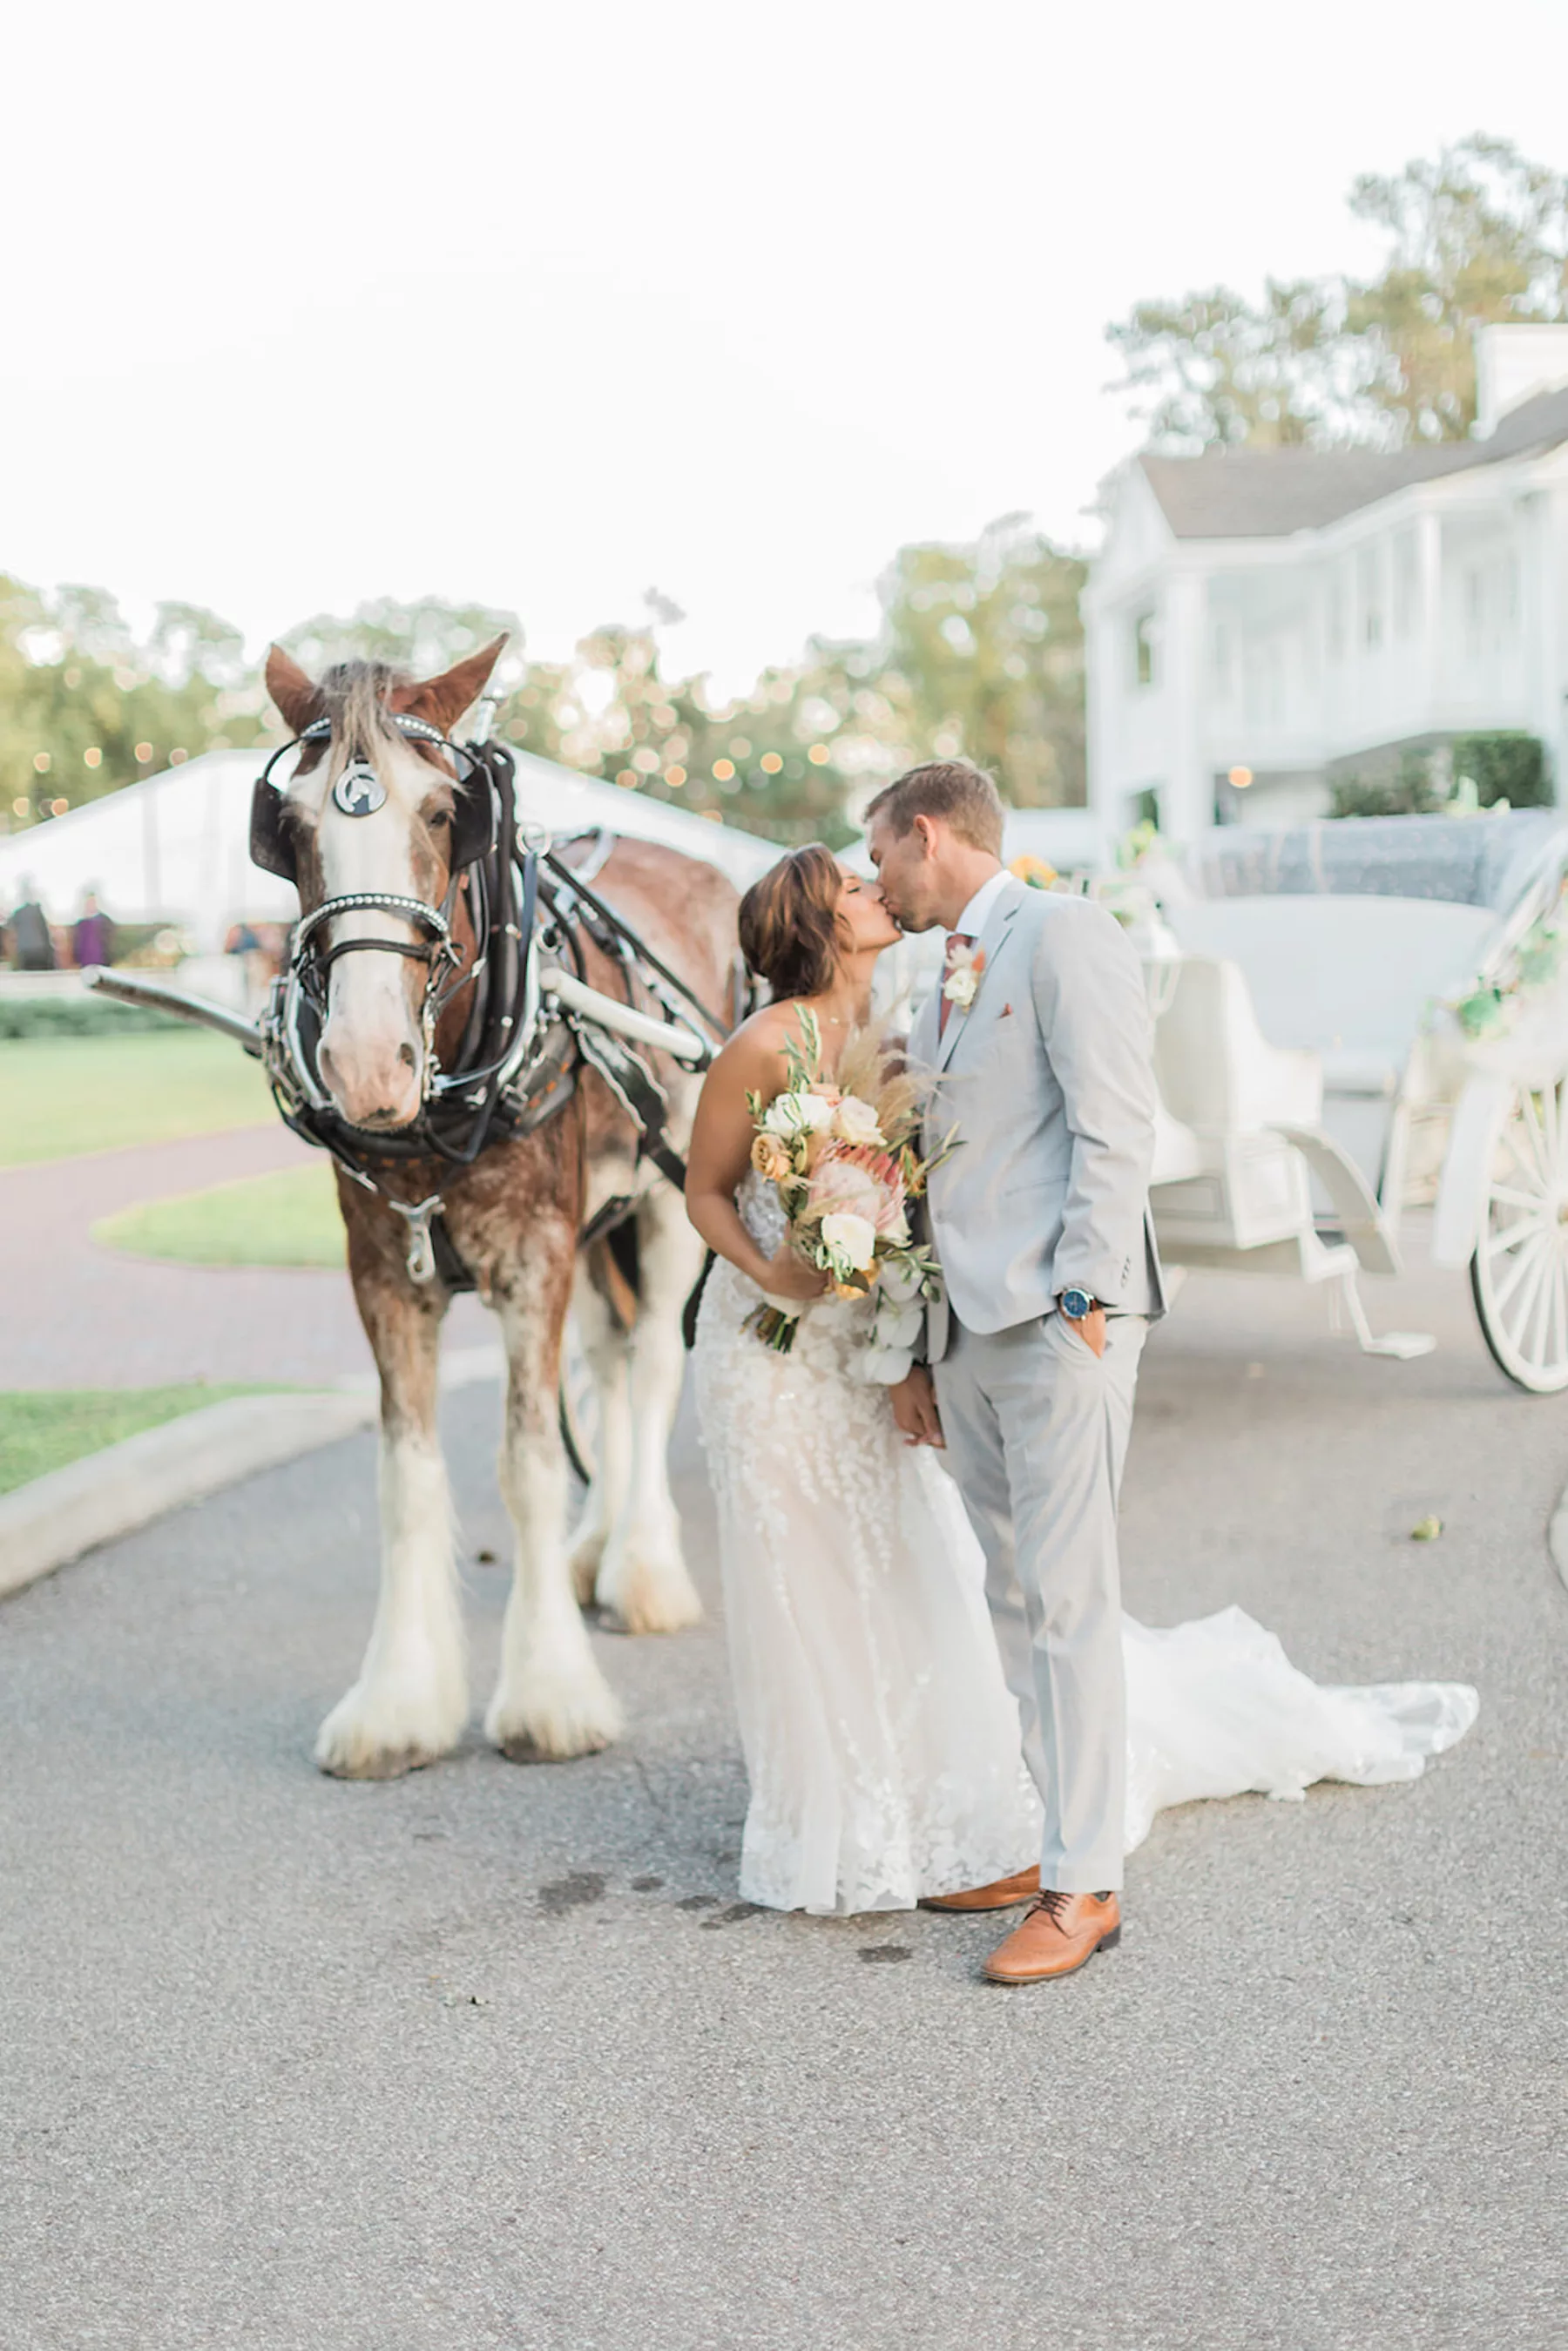 Bride and Groom with Horse and Carriage Wedding Portrait | Tampa Bay Event Planner B Eventful